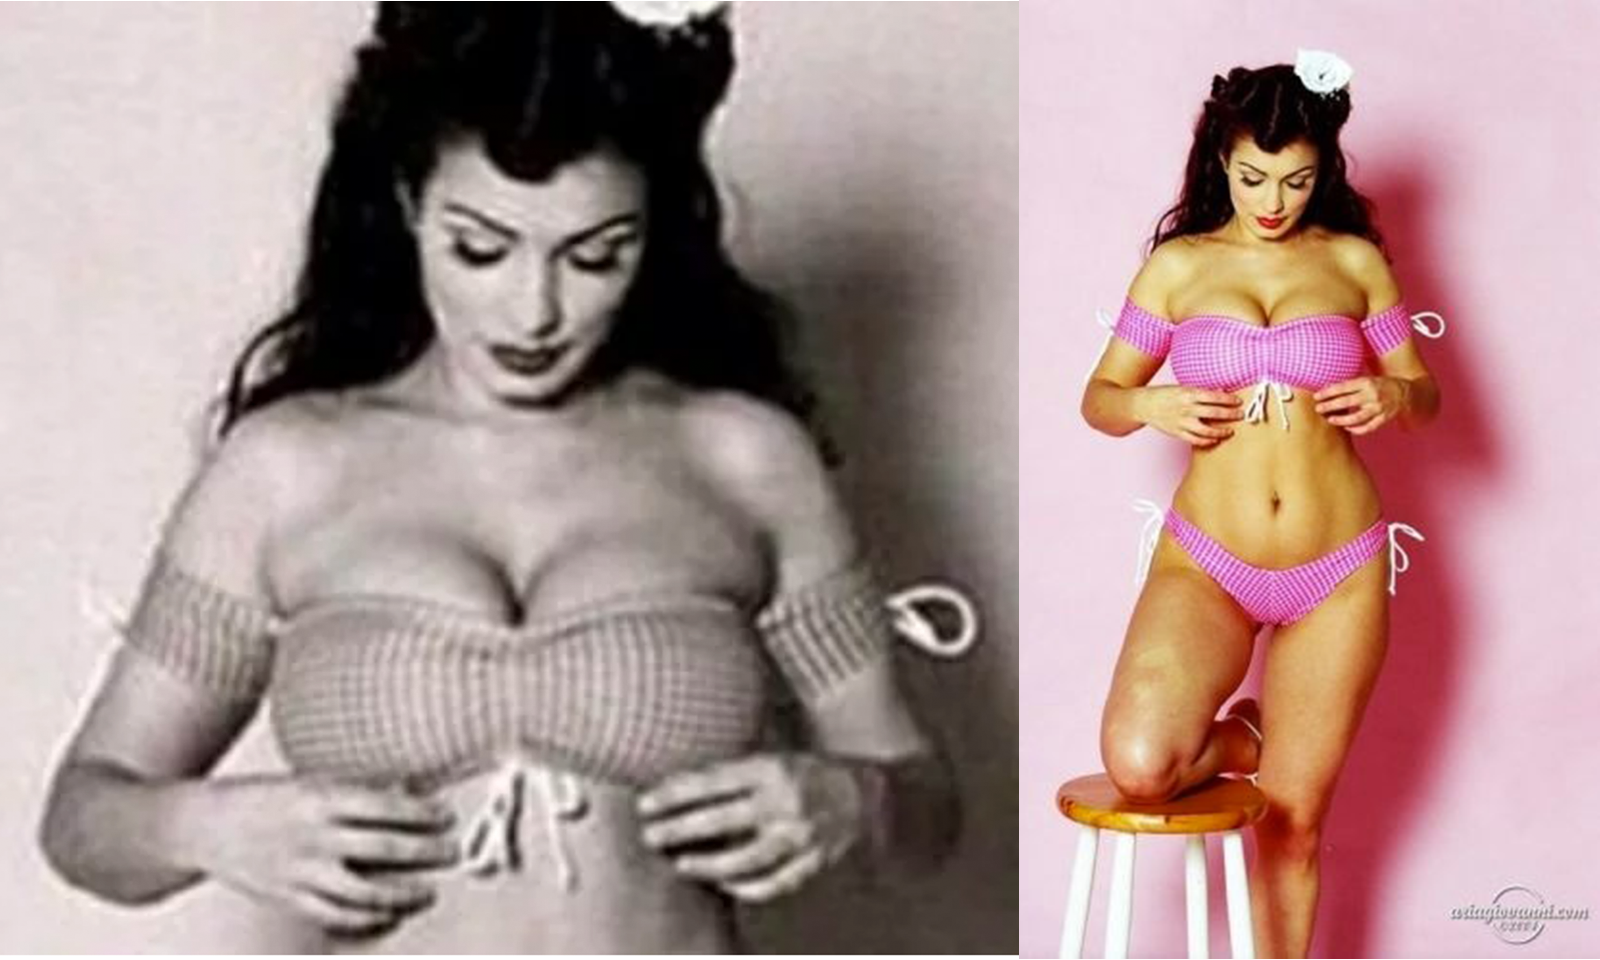 Aria Giovanni: Time's 'Perfect Body' 22 Years Before She Was Born AVN